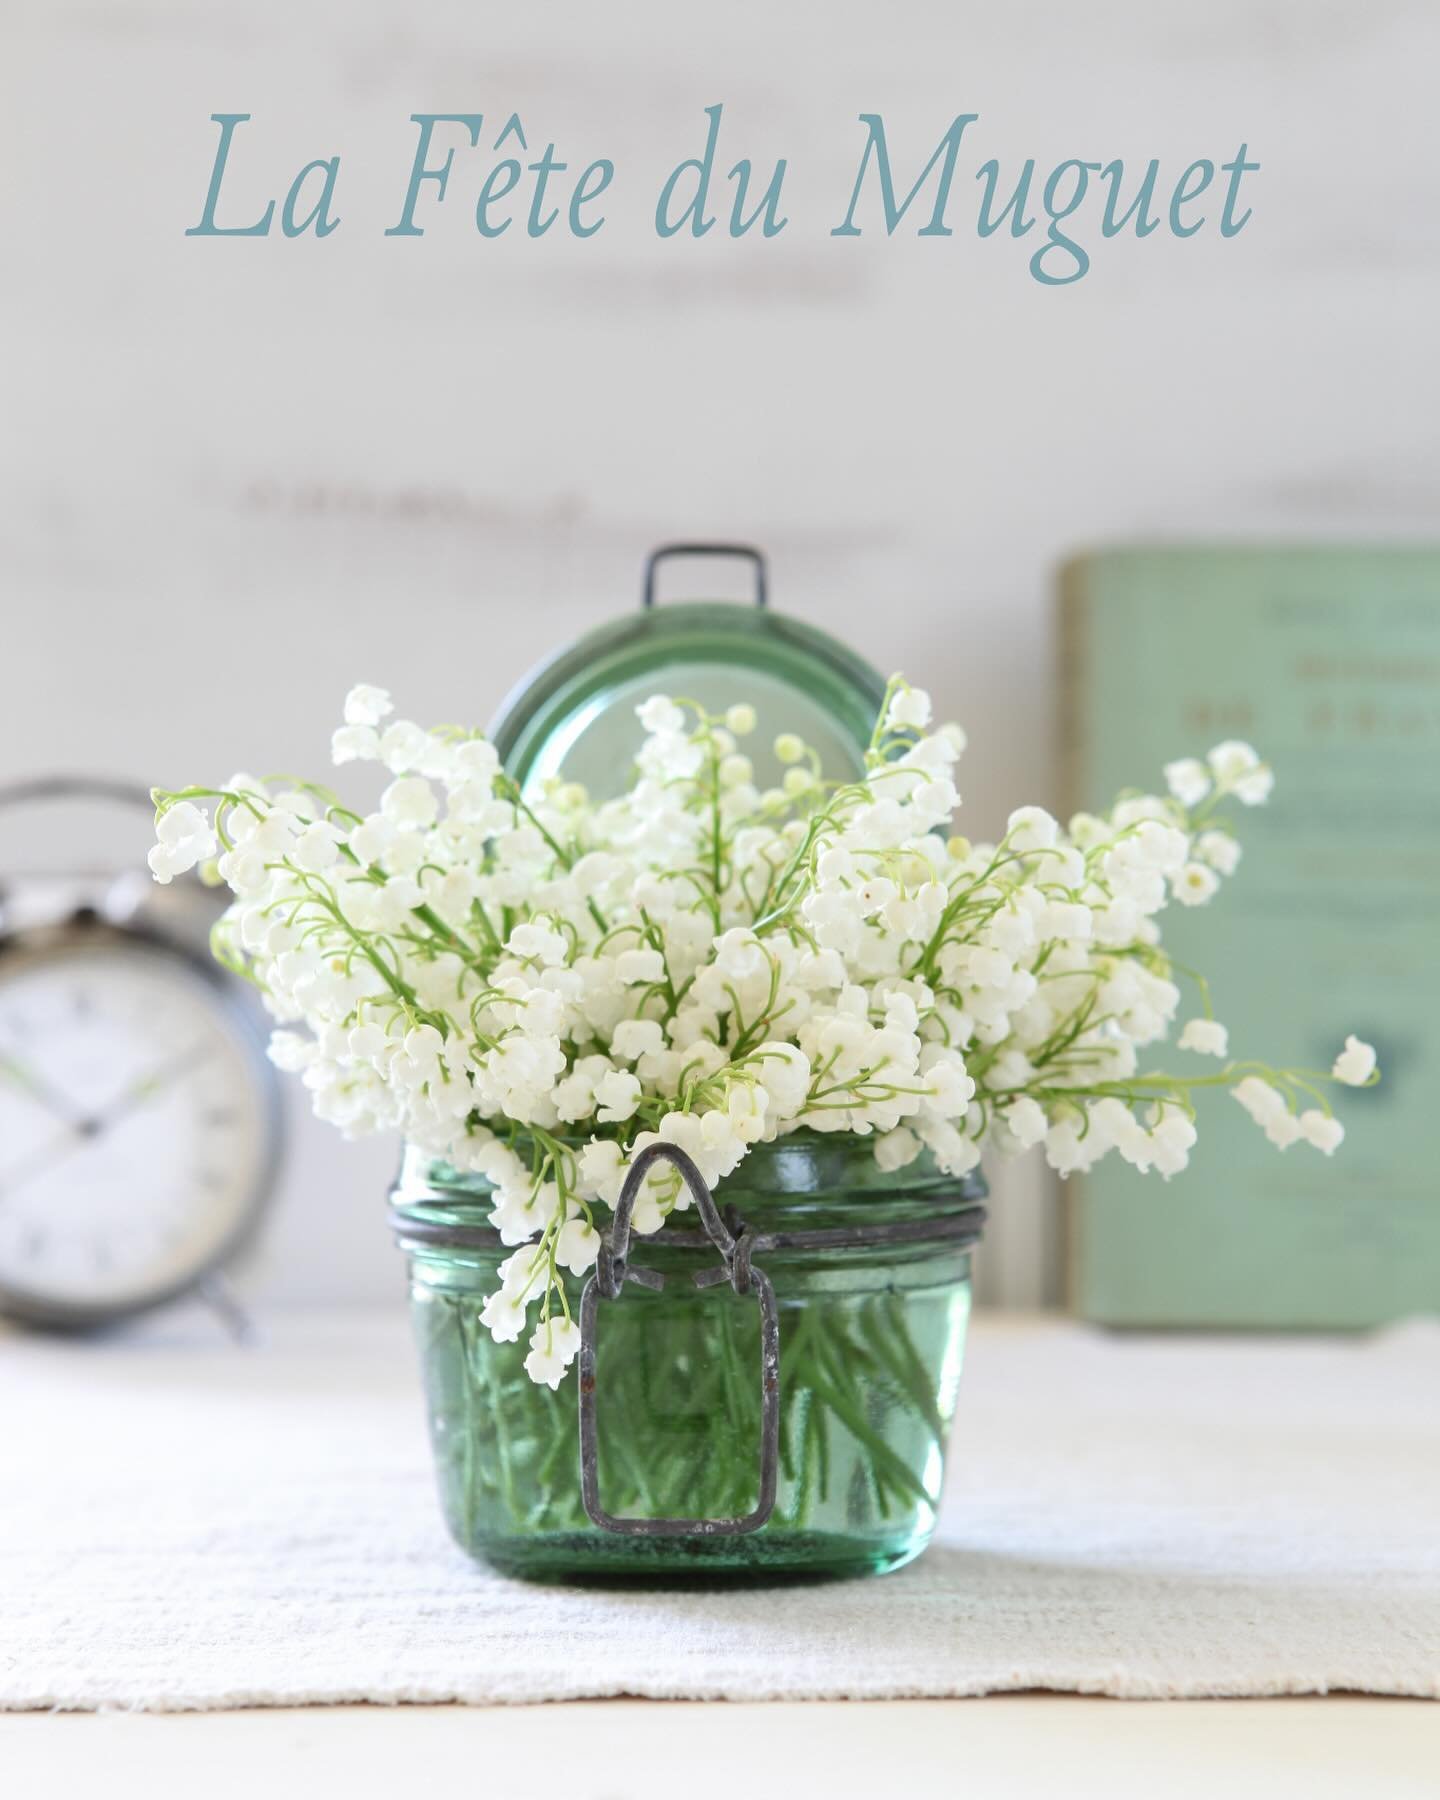 Happy 1st of May!  Lily of the valley will always and forever remind me of my dad {gardener extraordinaire} and my childhood home where these miniature beauties grew in abundance. I love that lily of the valley are a special part of the May 1st holid